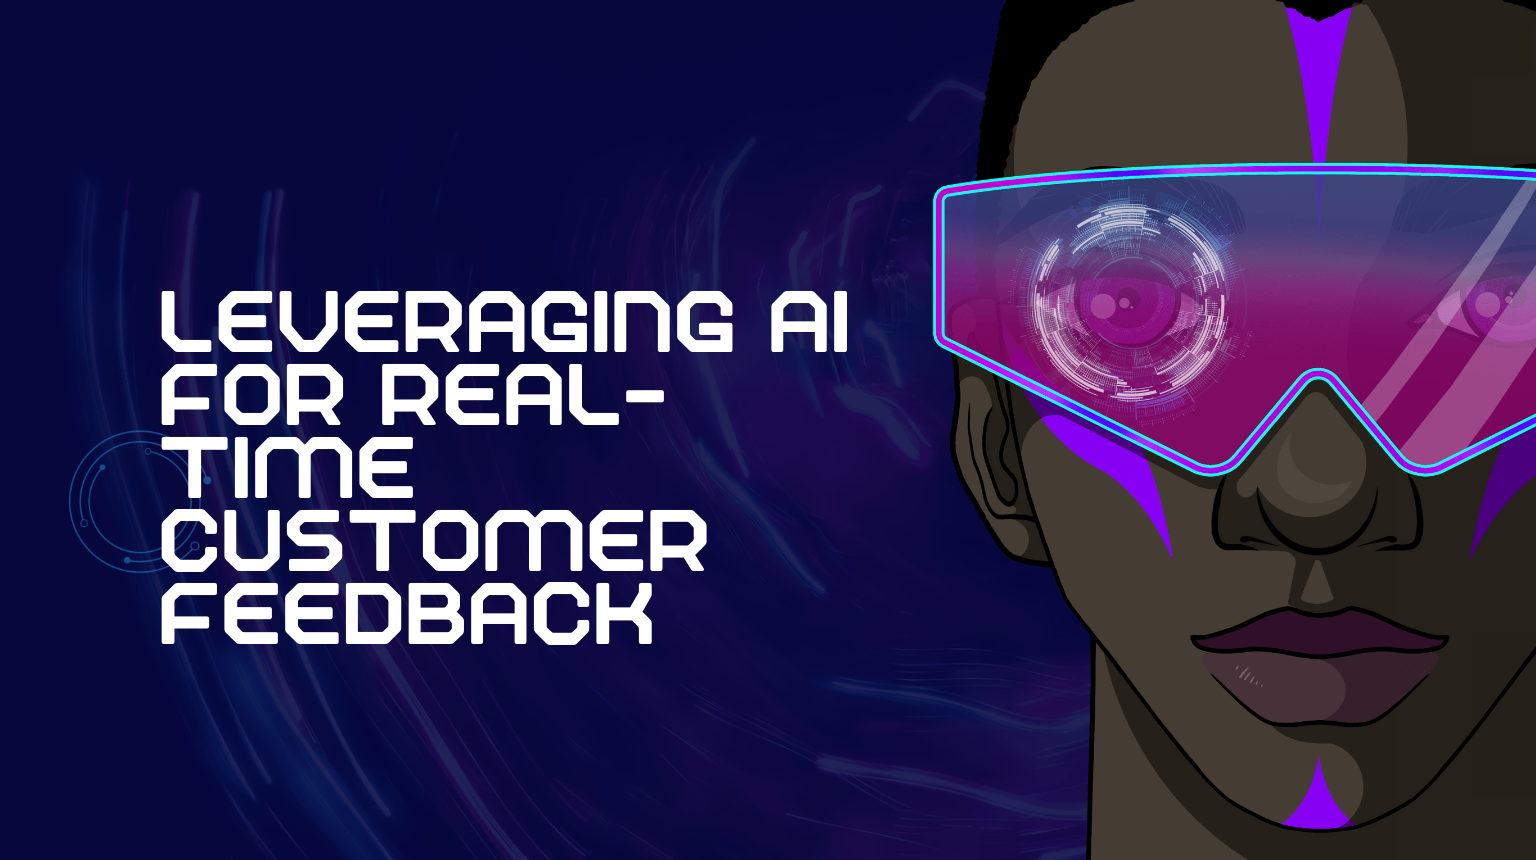 Leveraging AI for Real-Time Customer Feedback